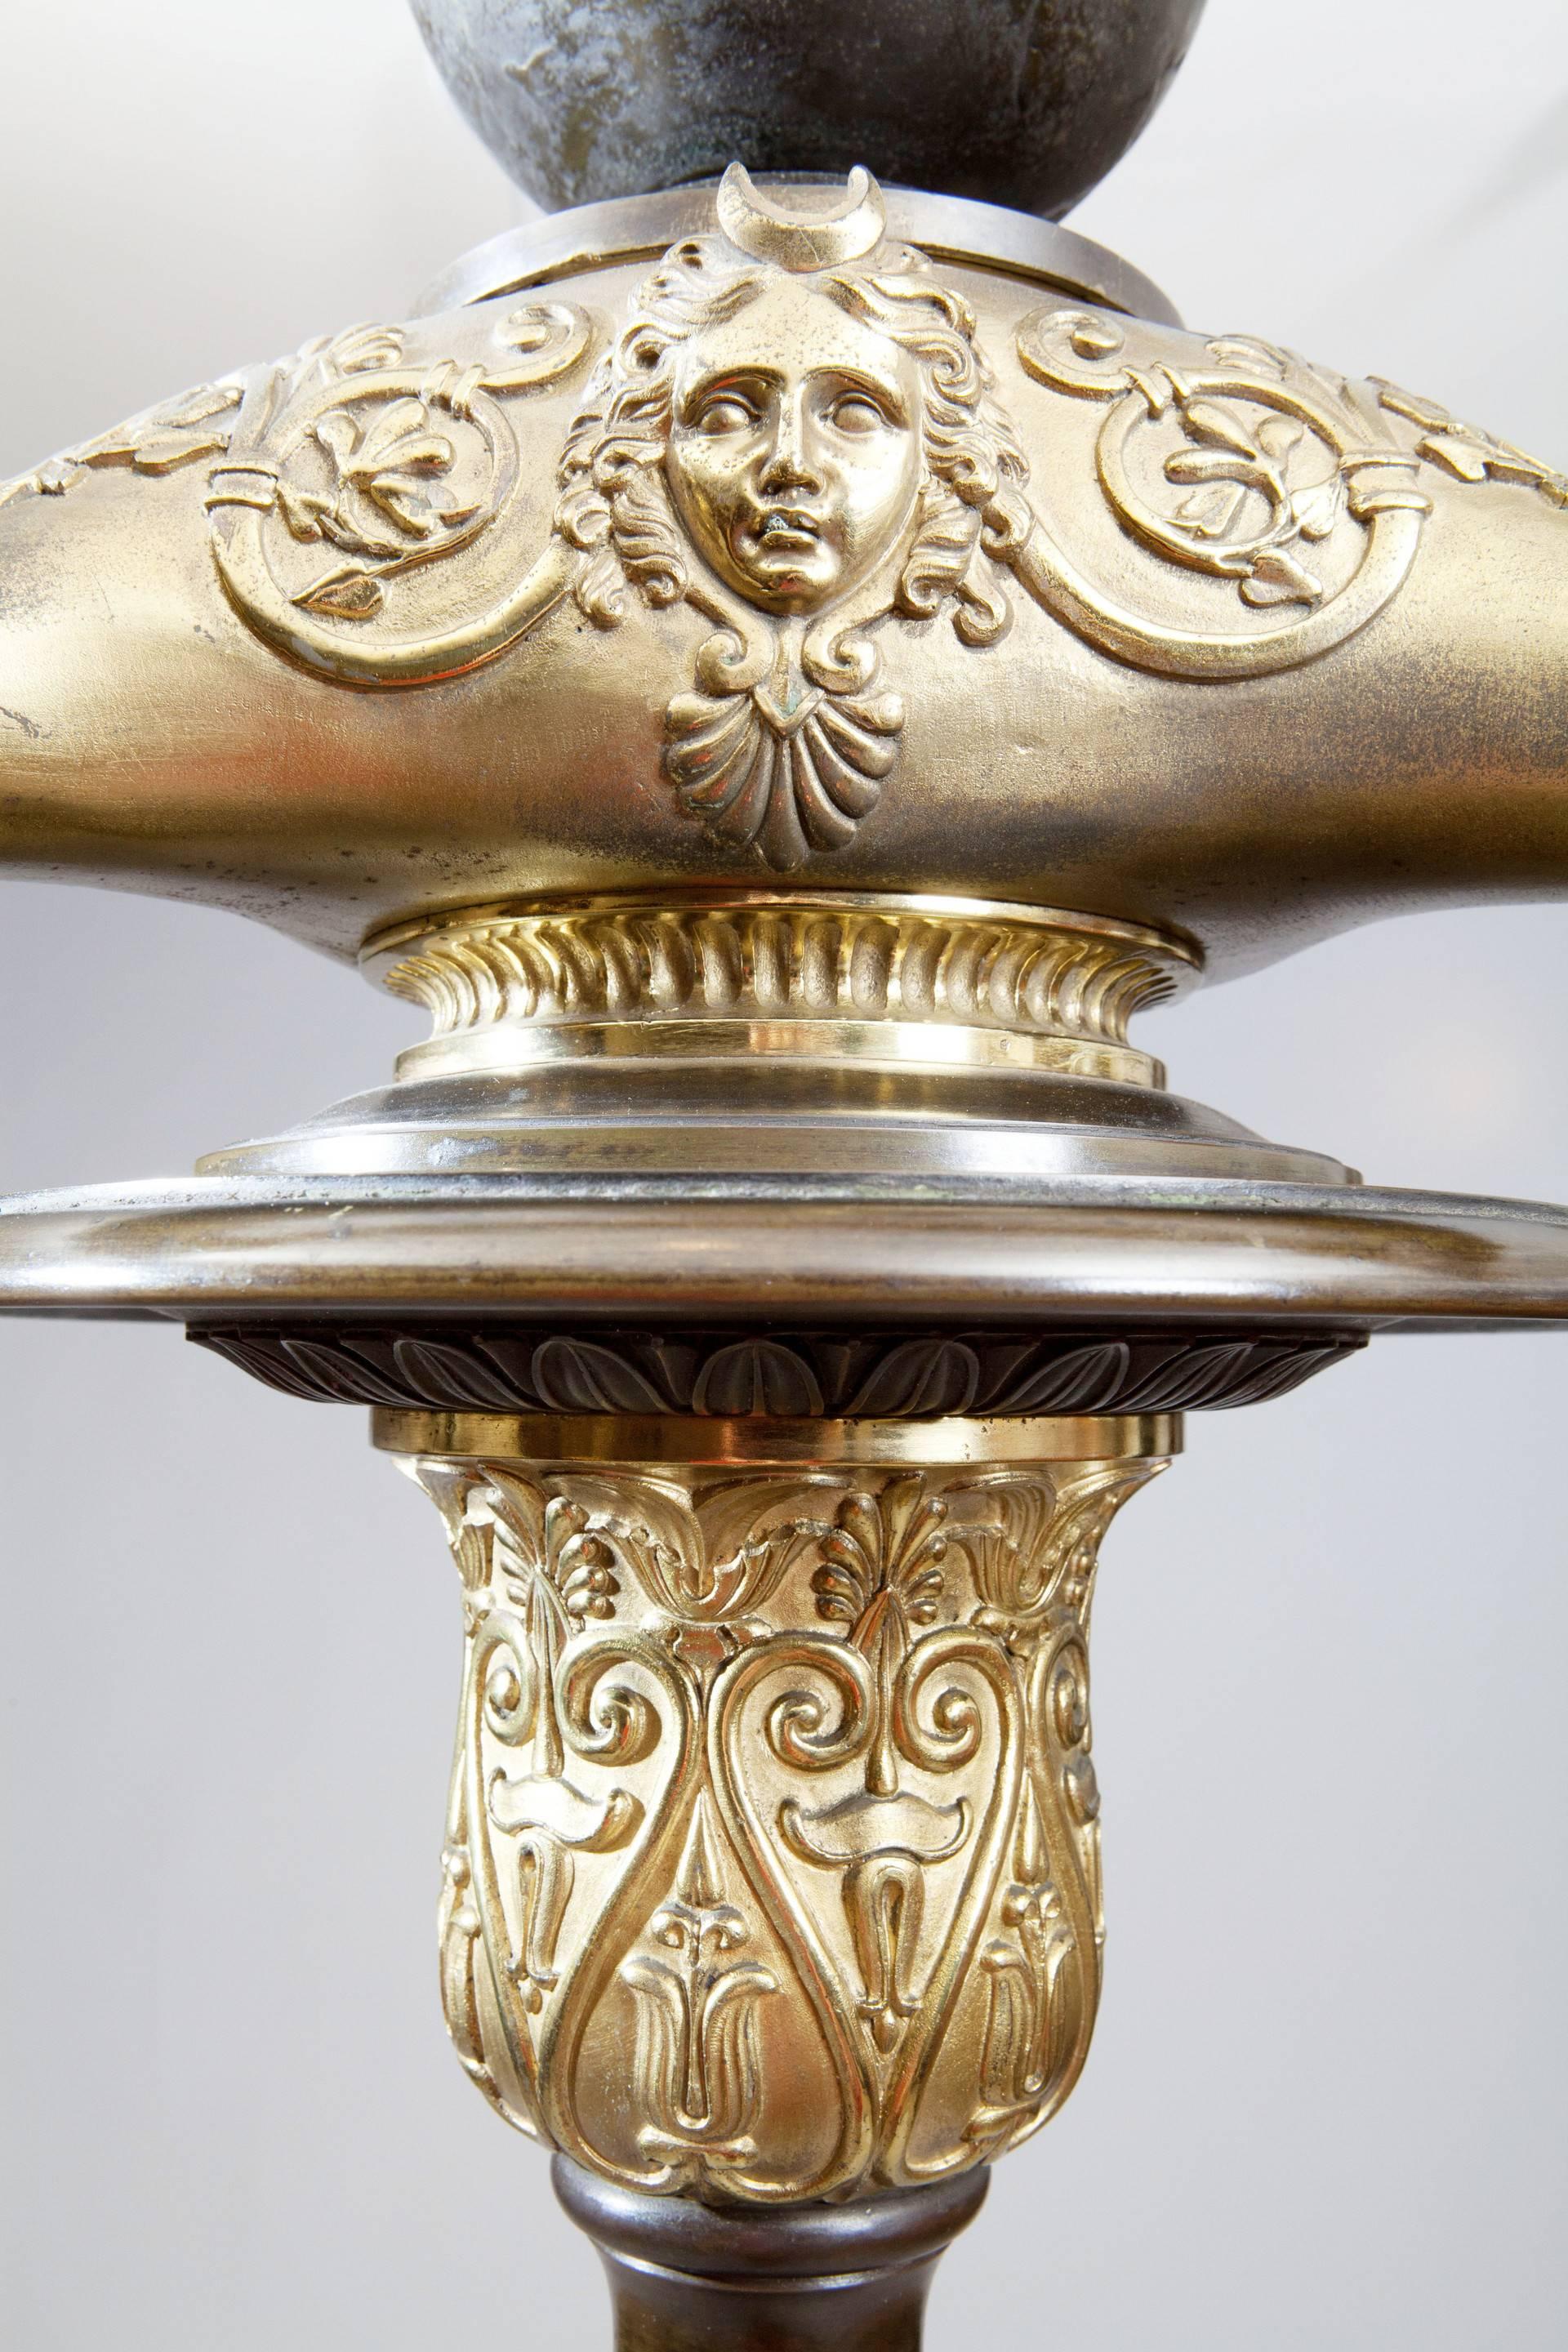 Neo Classical Hall Light in Bronze and Ormolu In Excellent Condition In London, by appointment only